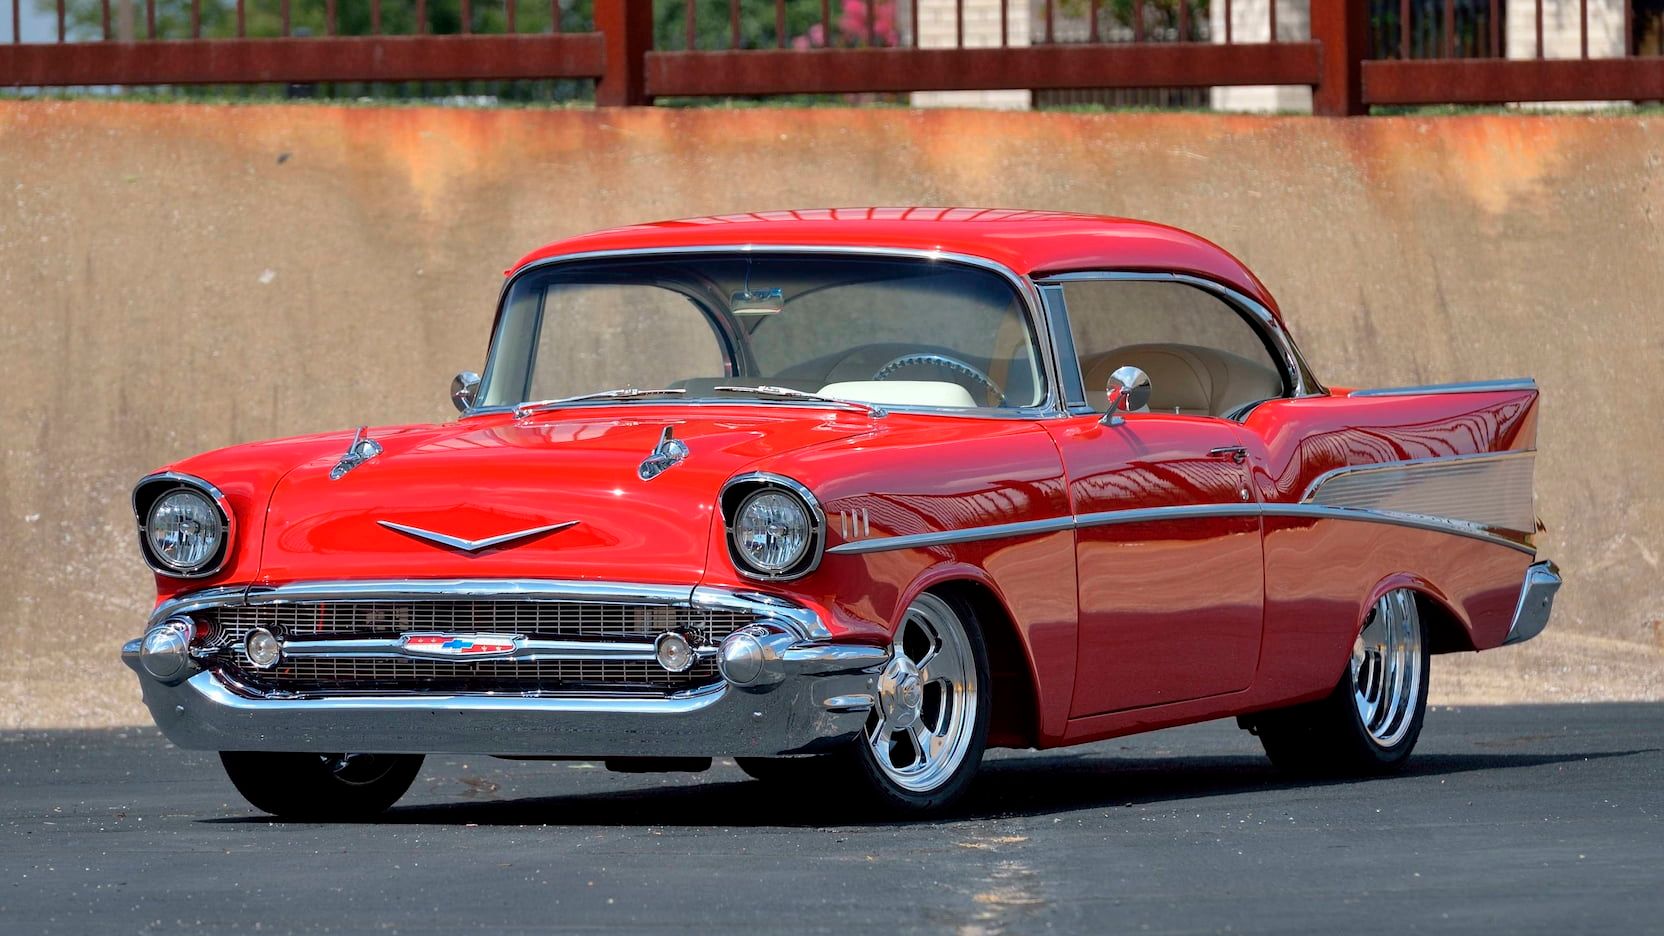 10 Things Most People Forget About The Iconic 1957 Chevy Bel Air